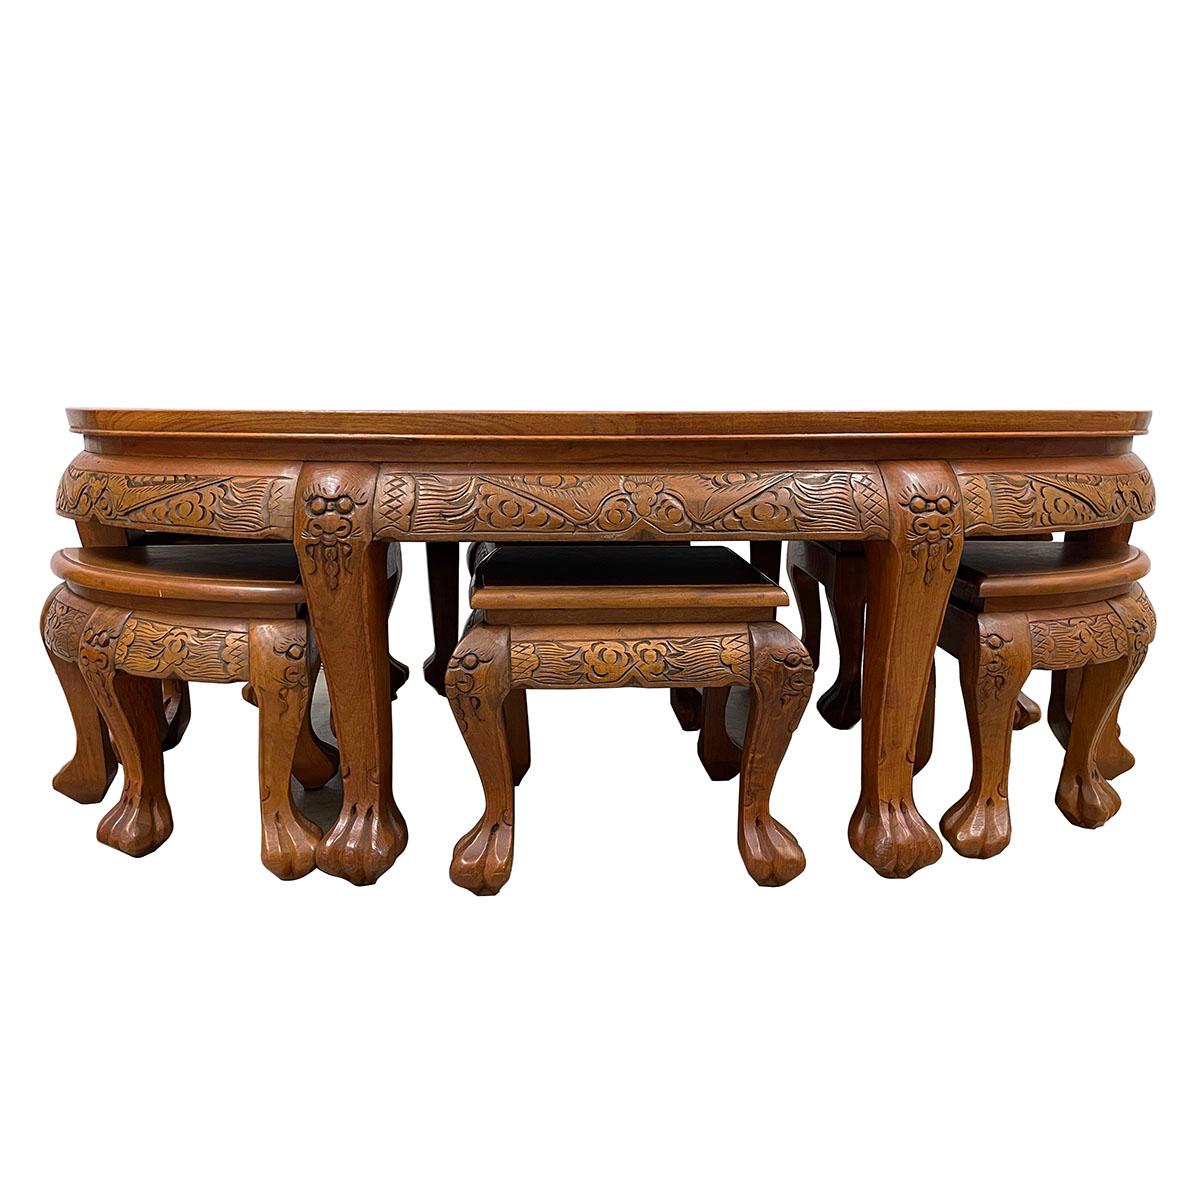 Vintage Chinese Massive Carved Teak Wood Coffee Table with 6 Nesting Stools 4